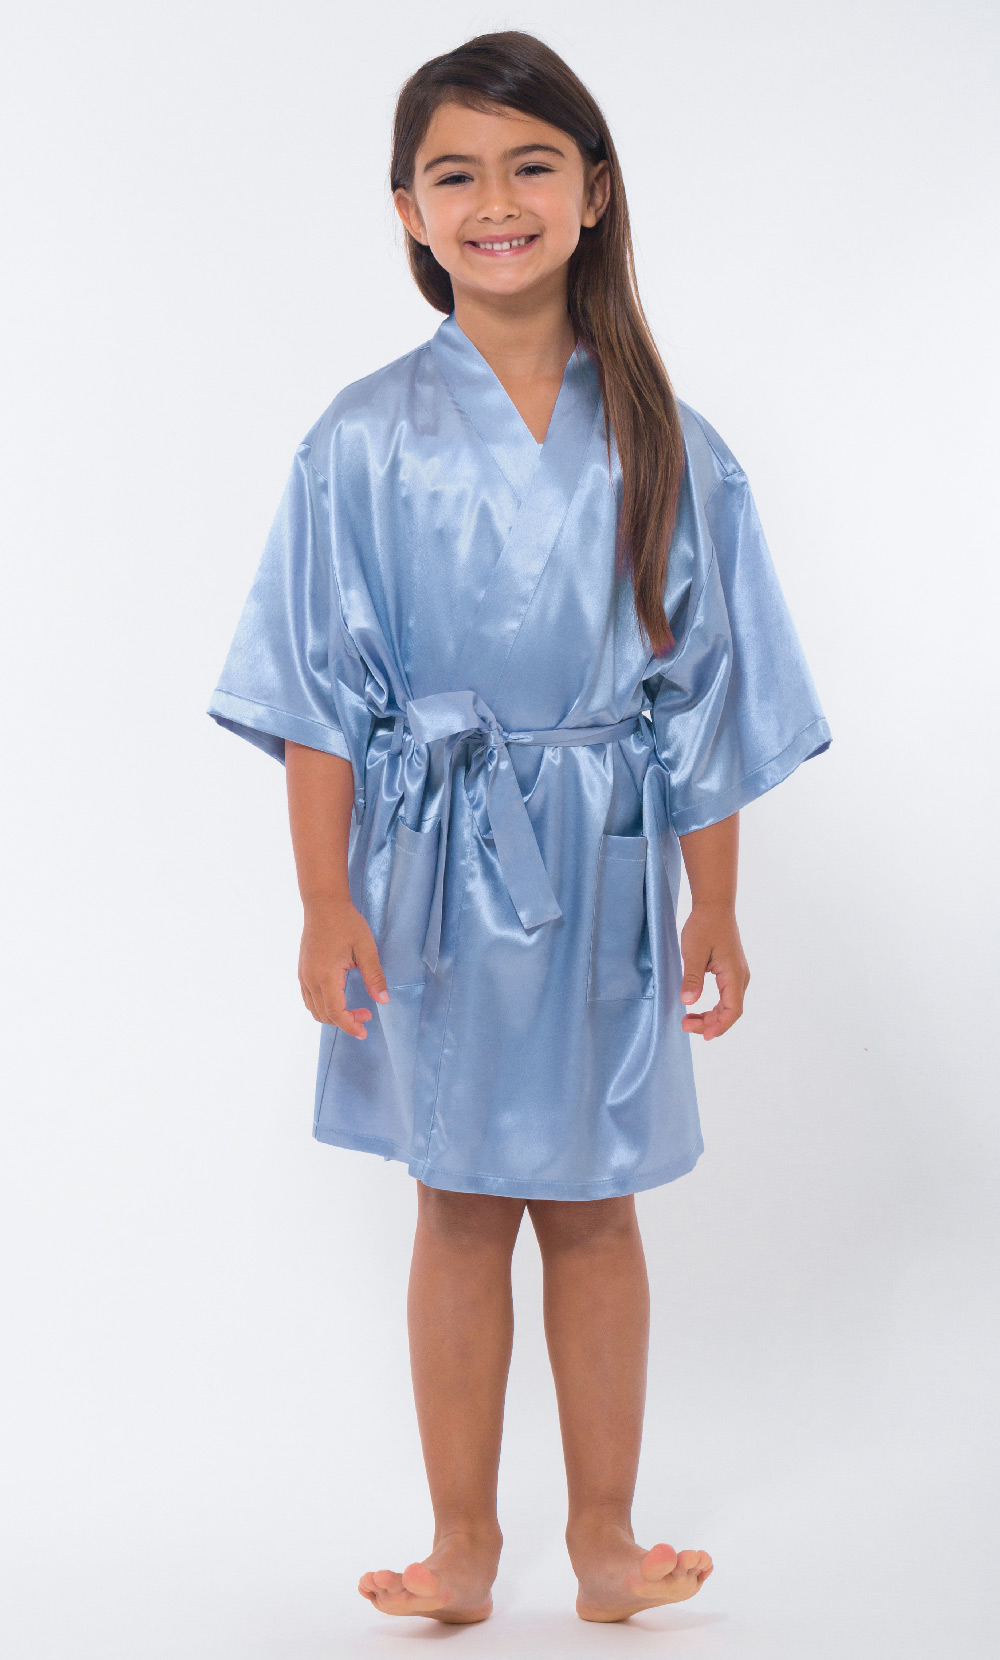 This is Satin Robe for the Flower Girl